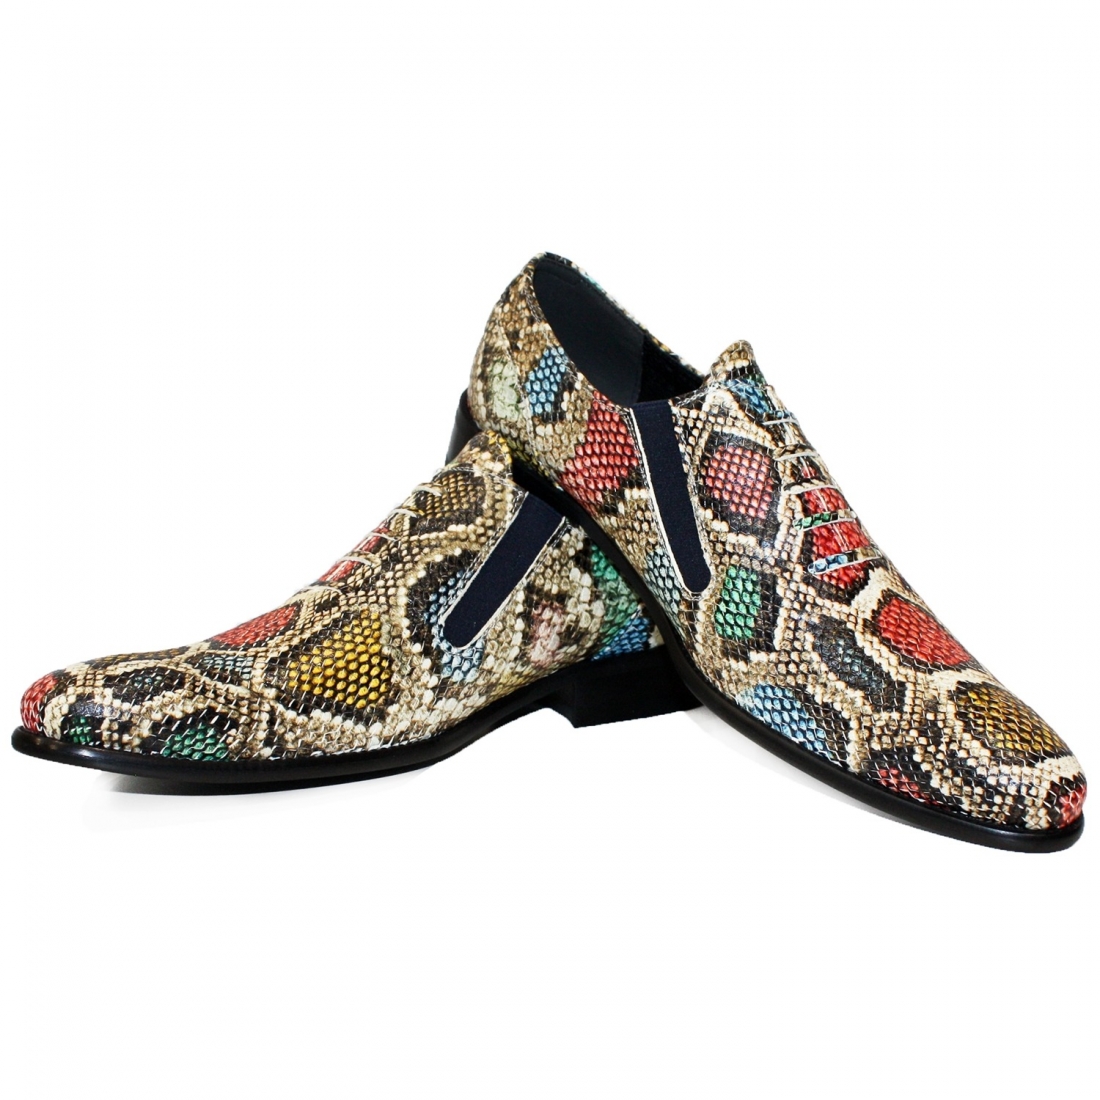 Modello Vabetto - Loafers & Slip-Ons - Handmade Colorful Italian Leather Shoes